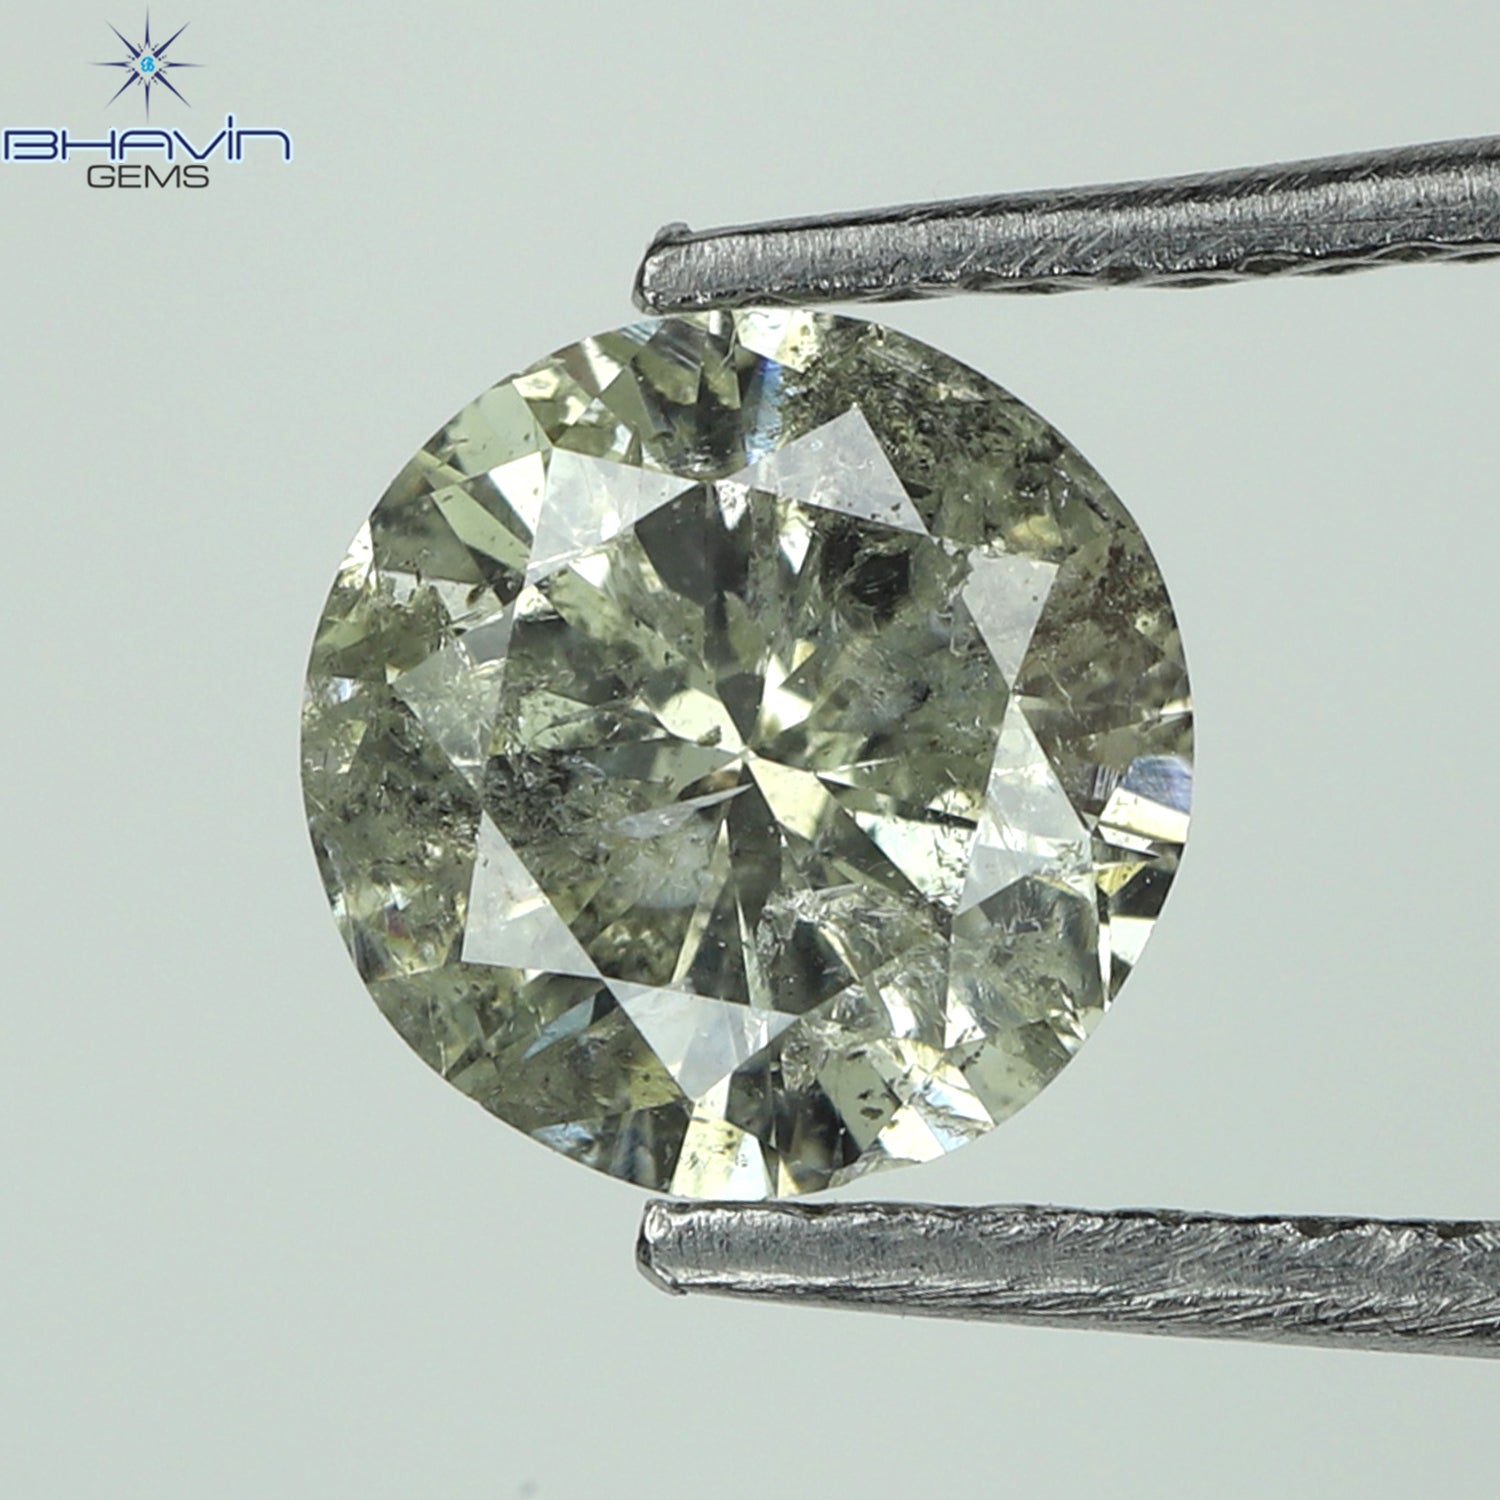 0.63 CT Round Shape Natural Loose Diamond Salt And Pepper Color I2 Clarity (5.55 MM)